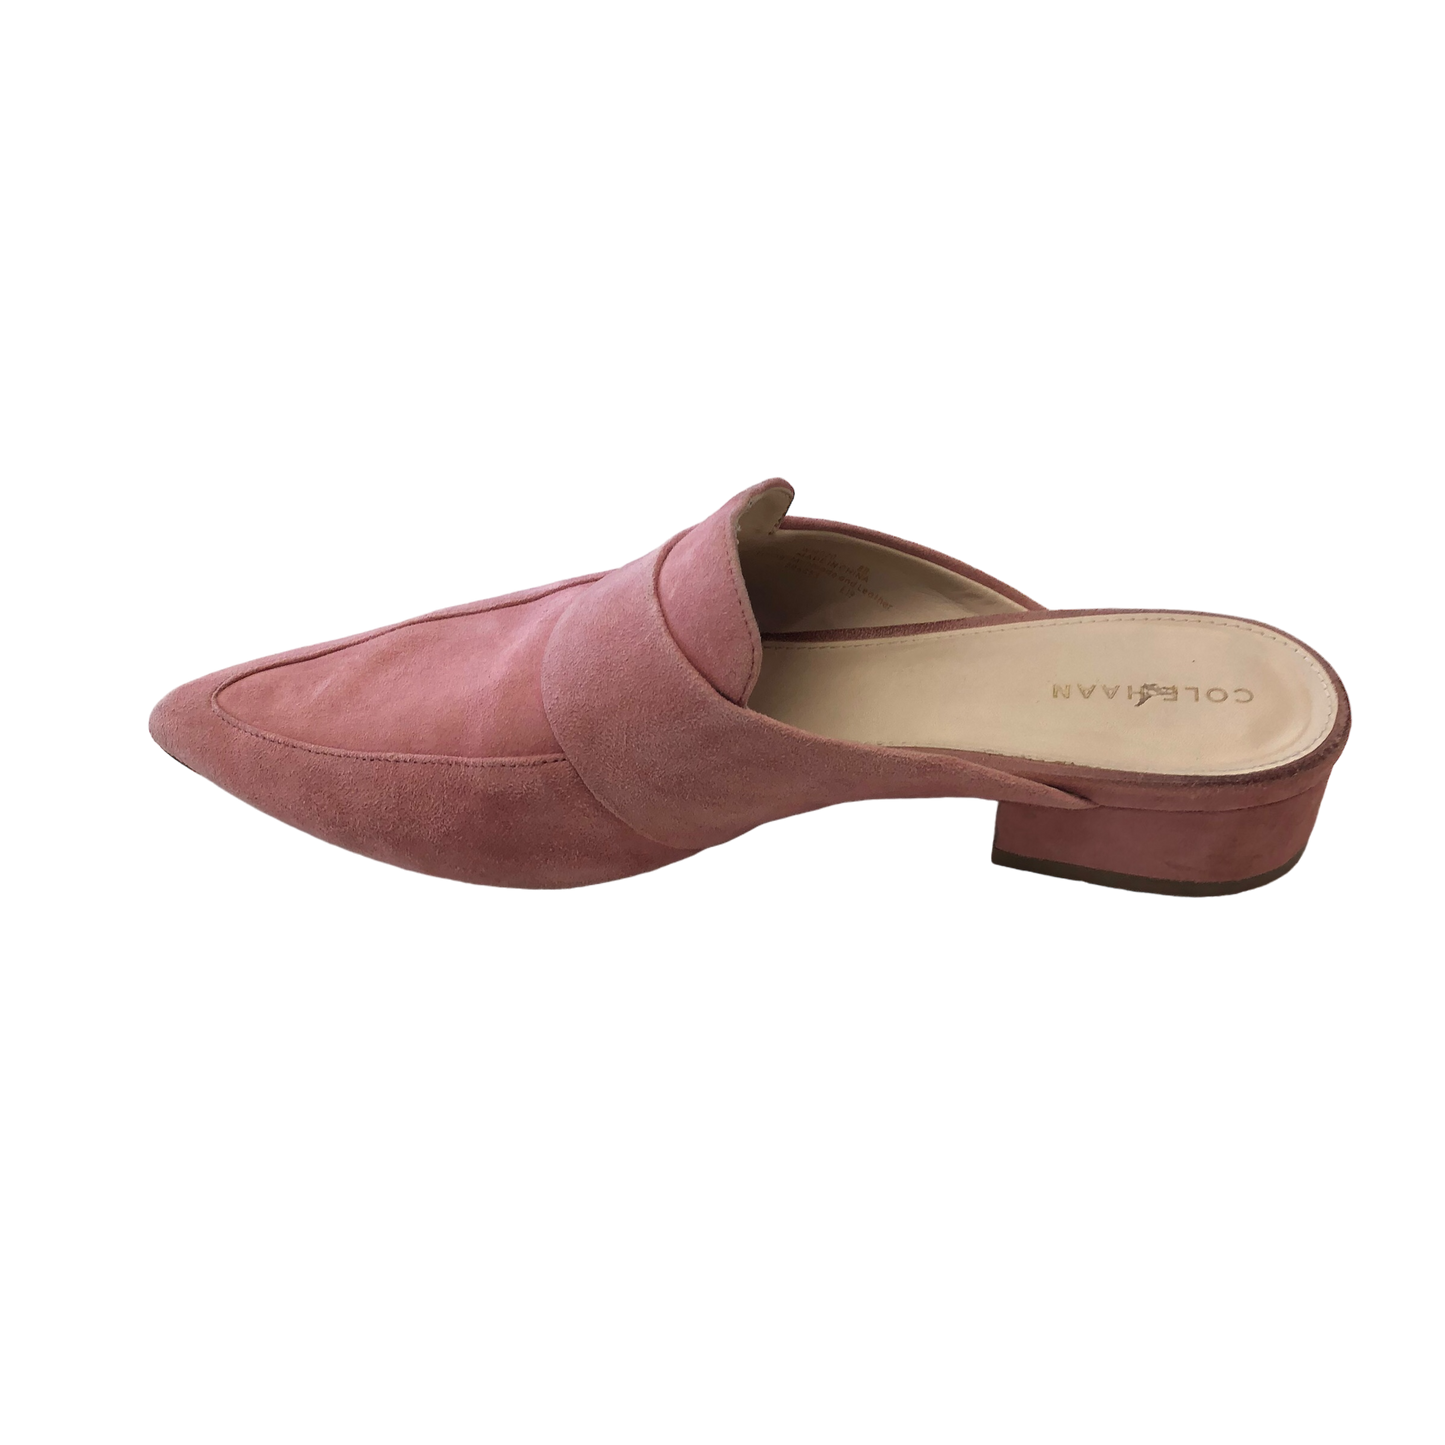 Pink Shoes Flats Cole-haan, Size 8